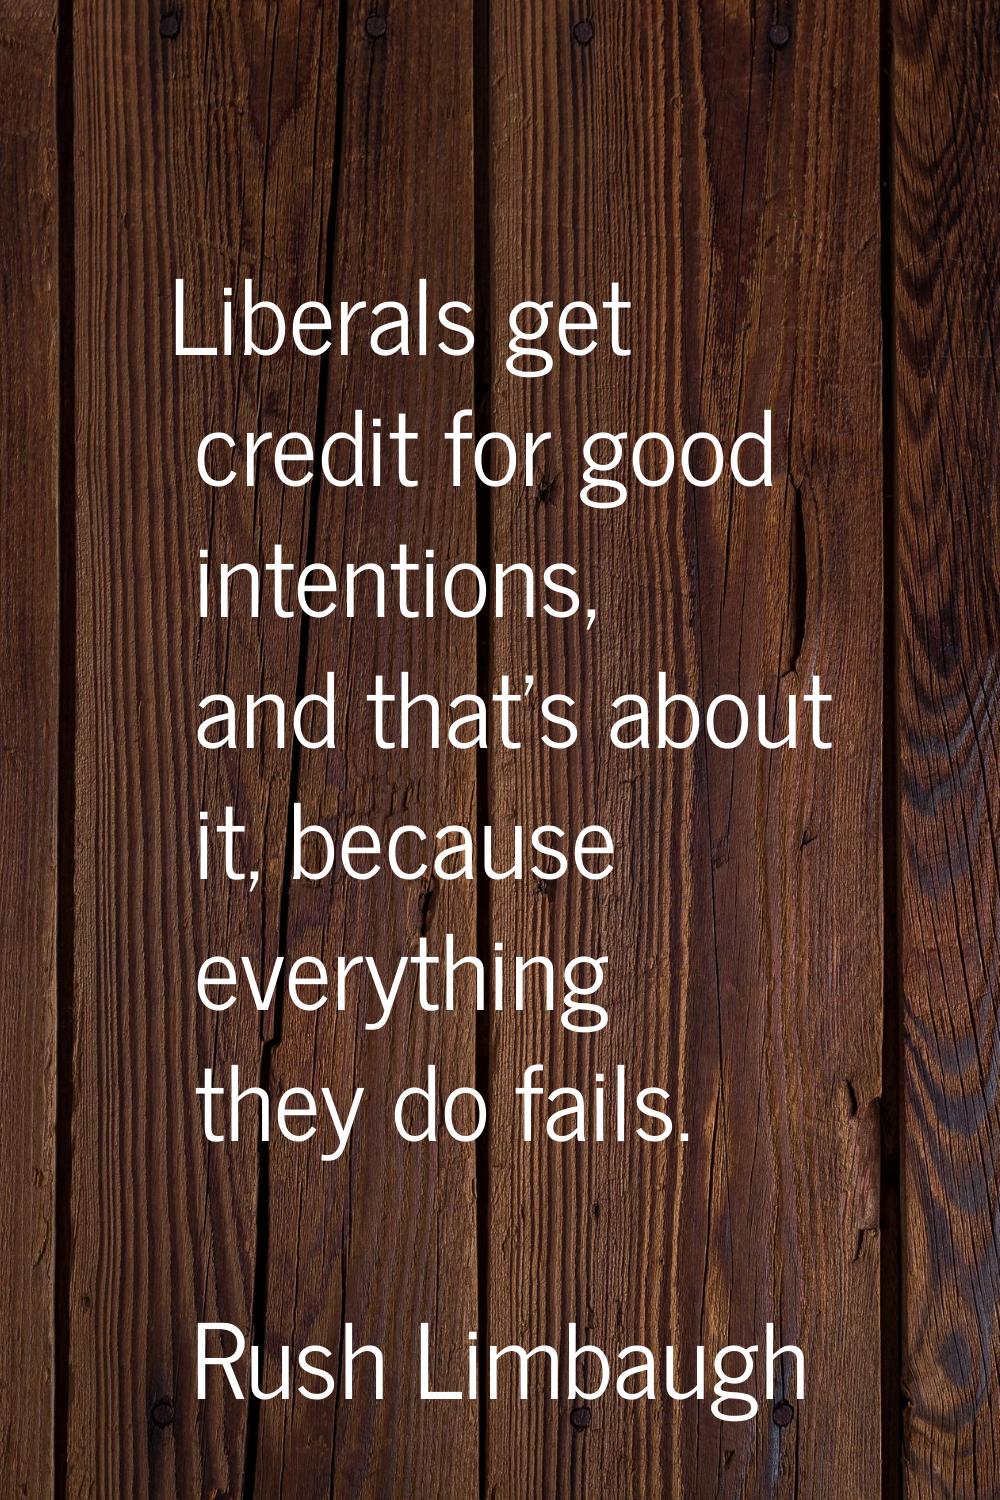 Liberals get credit for good intentions, and that's about it, because everything they do fails.